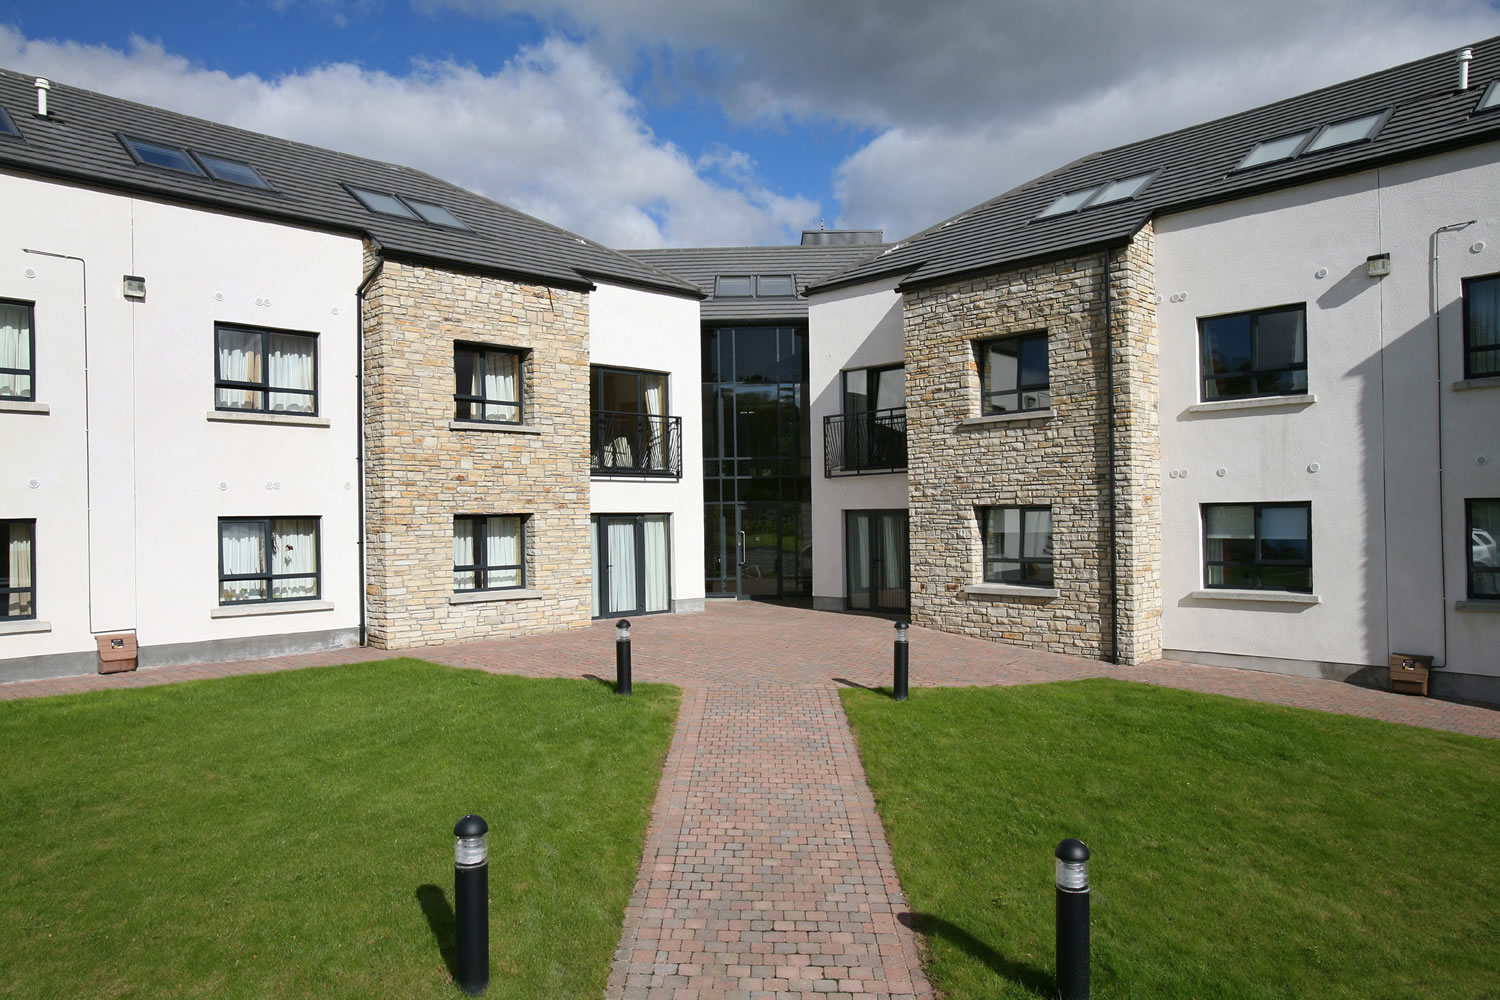 Mill Park Hotel Complex And Leisure Centre, Donegal Town